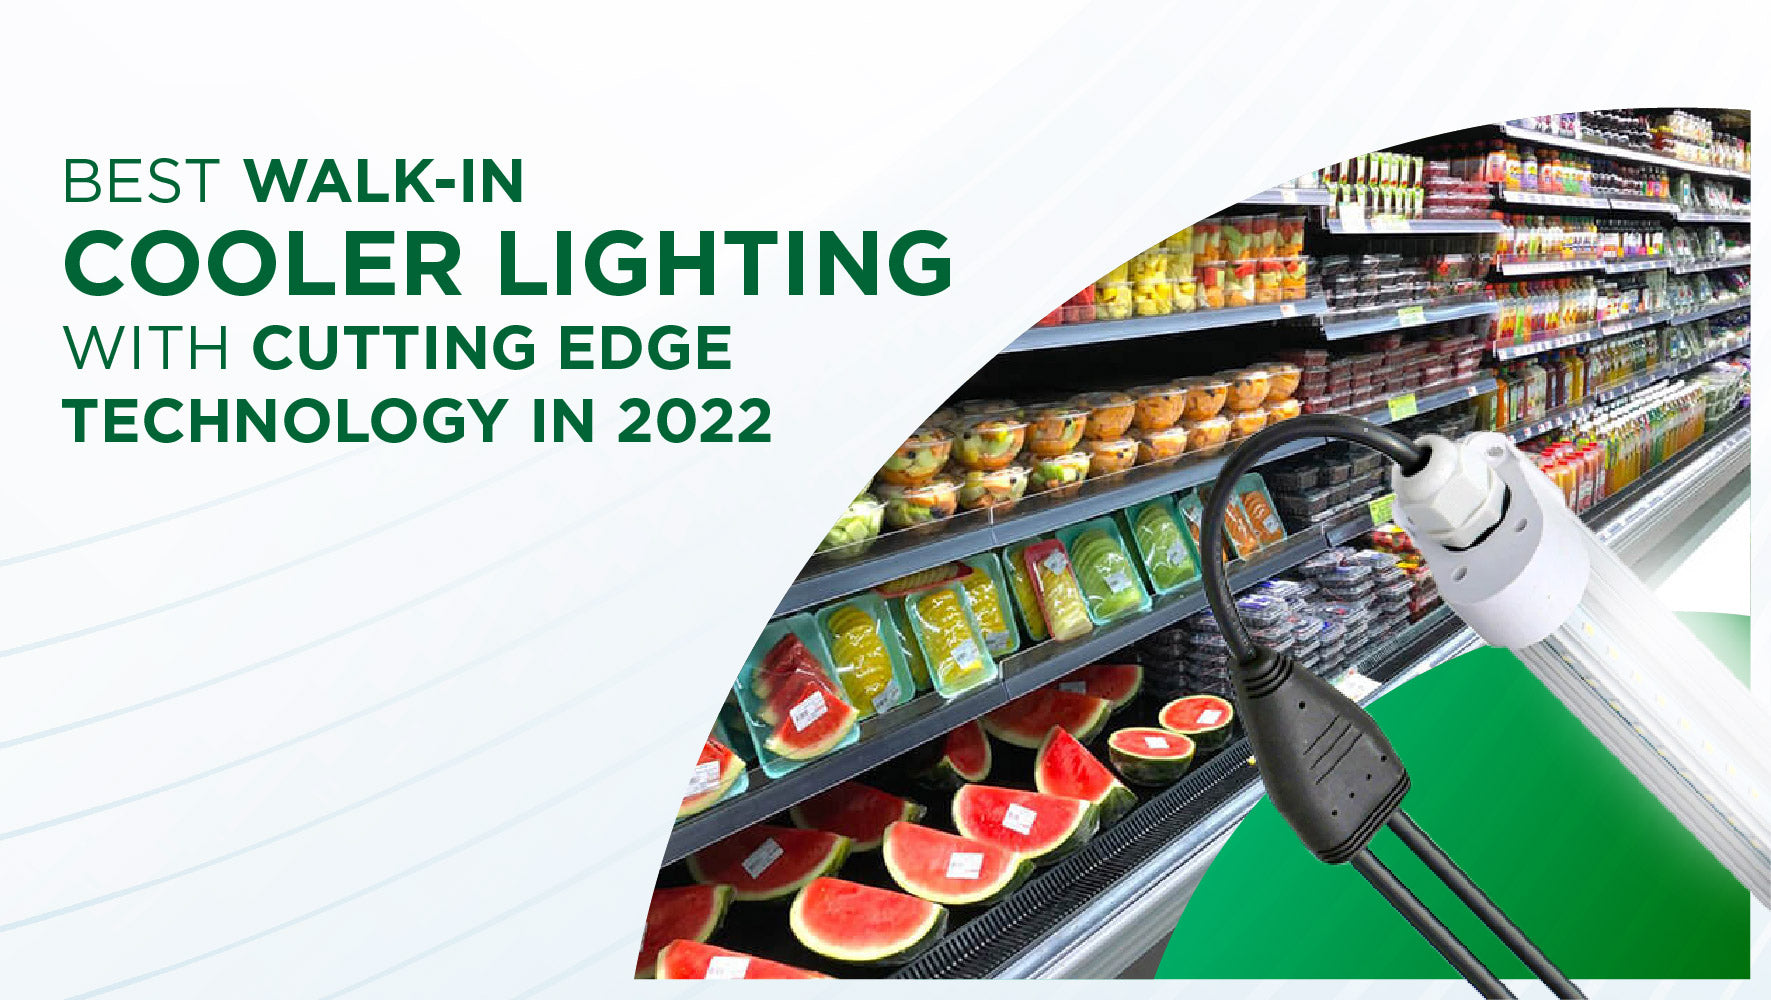 Best Walk-In Cooler Lighting With Cutting Edge Technology in 2022